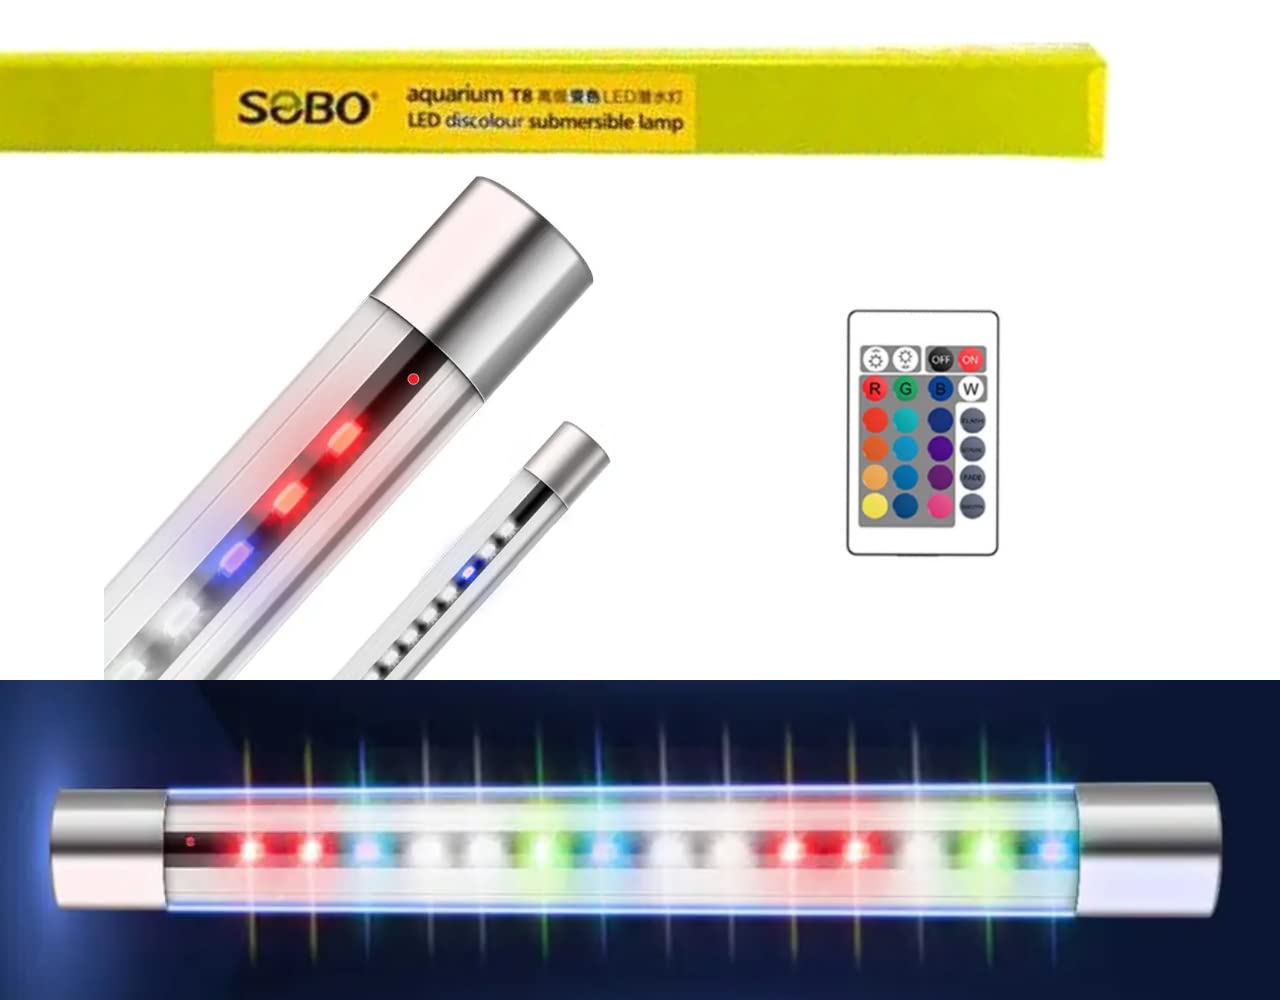 Sobo T4 Series Aquarium Fish Tank Multi Color Change Fully Submersible (Waterproof) LED Lamp with Remote Control & 2 Suction Cups (T4-480 an | Light Length : 450mm)